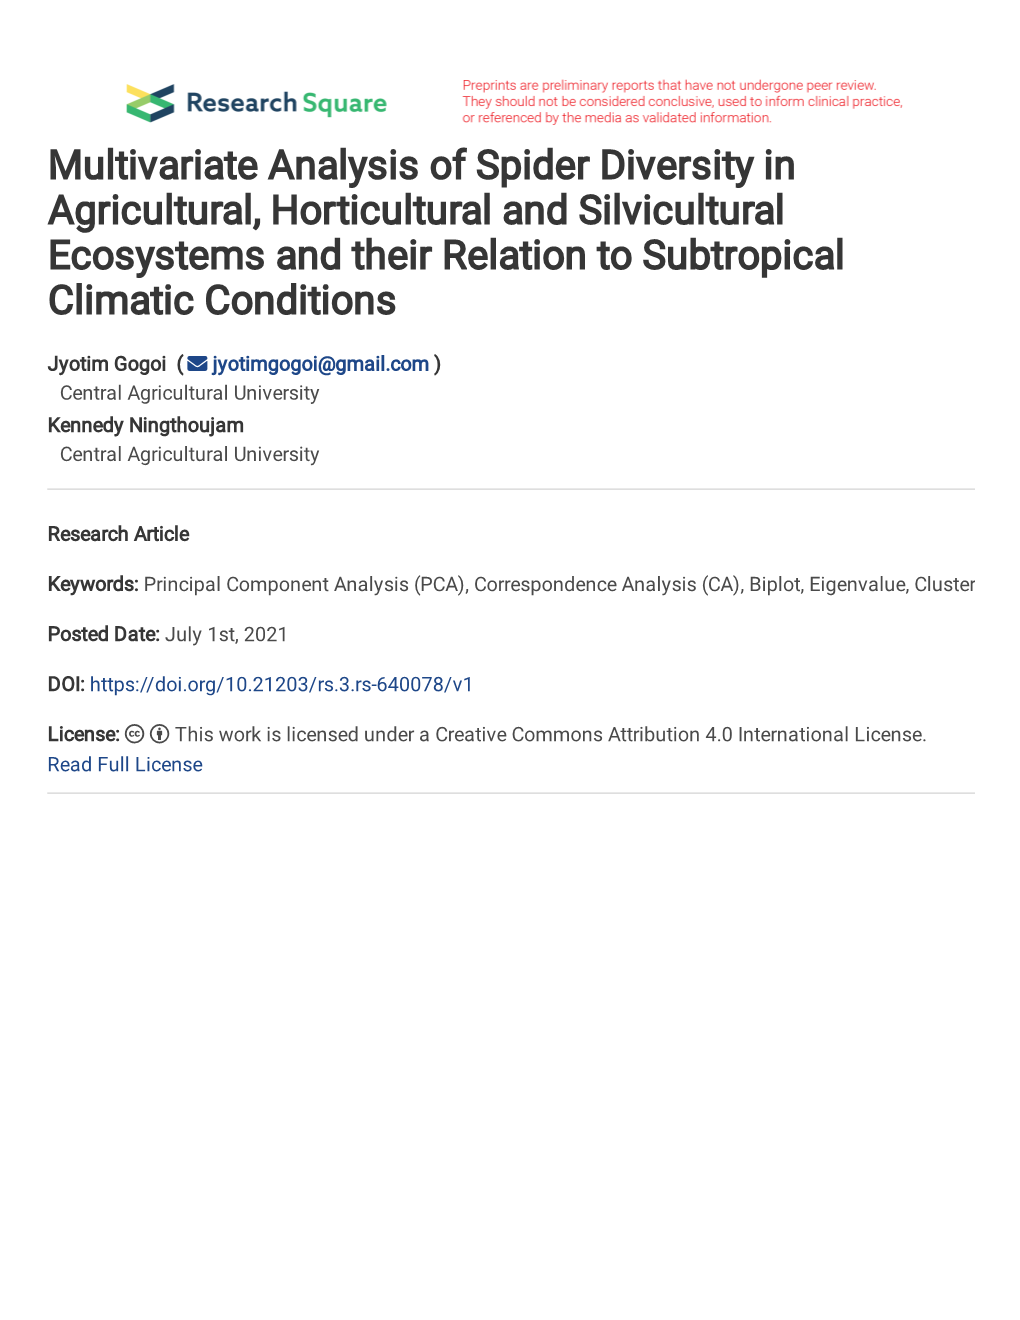 Multivariate Analysis of Spider Diversity in Agricultural, Horticultural and Silvicultural Ecosystems and Their Relation to Subtropical Climatic Conditions